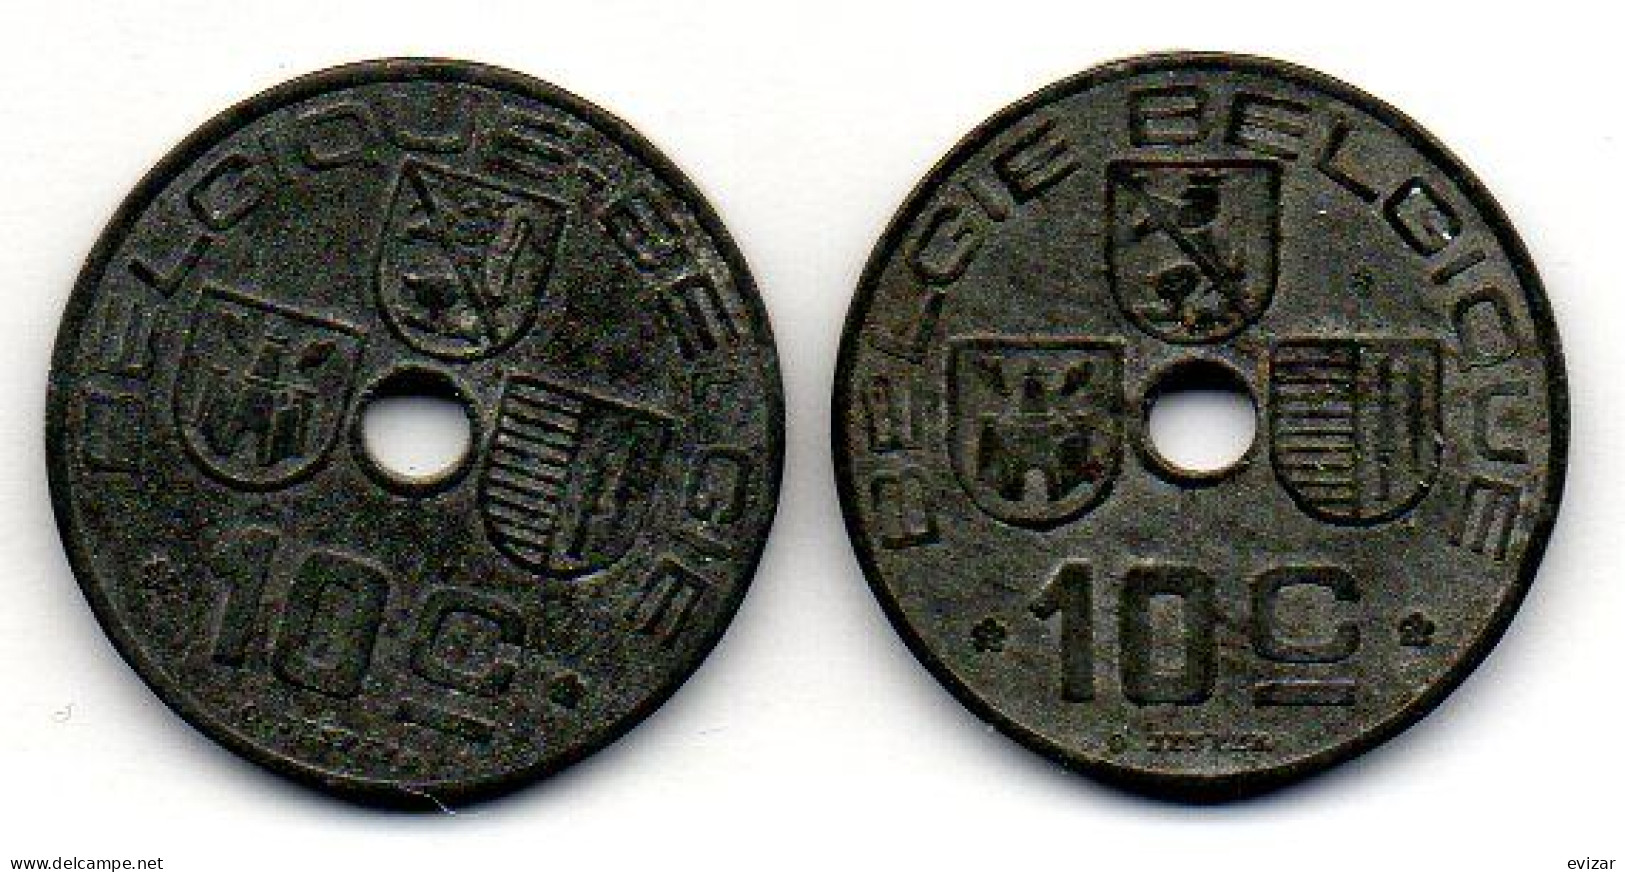 BELGIUM - GERMAN OCCUPATION WWII - Set Of Two Coins 10 Centimes, Zinc, Year 1942-44, KM #125, 126, French & Dutch Legend - 10 Cent